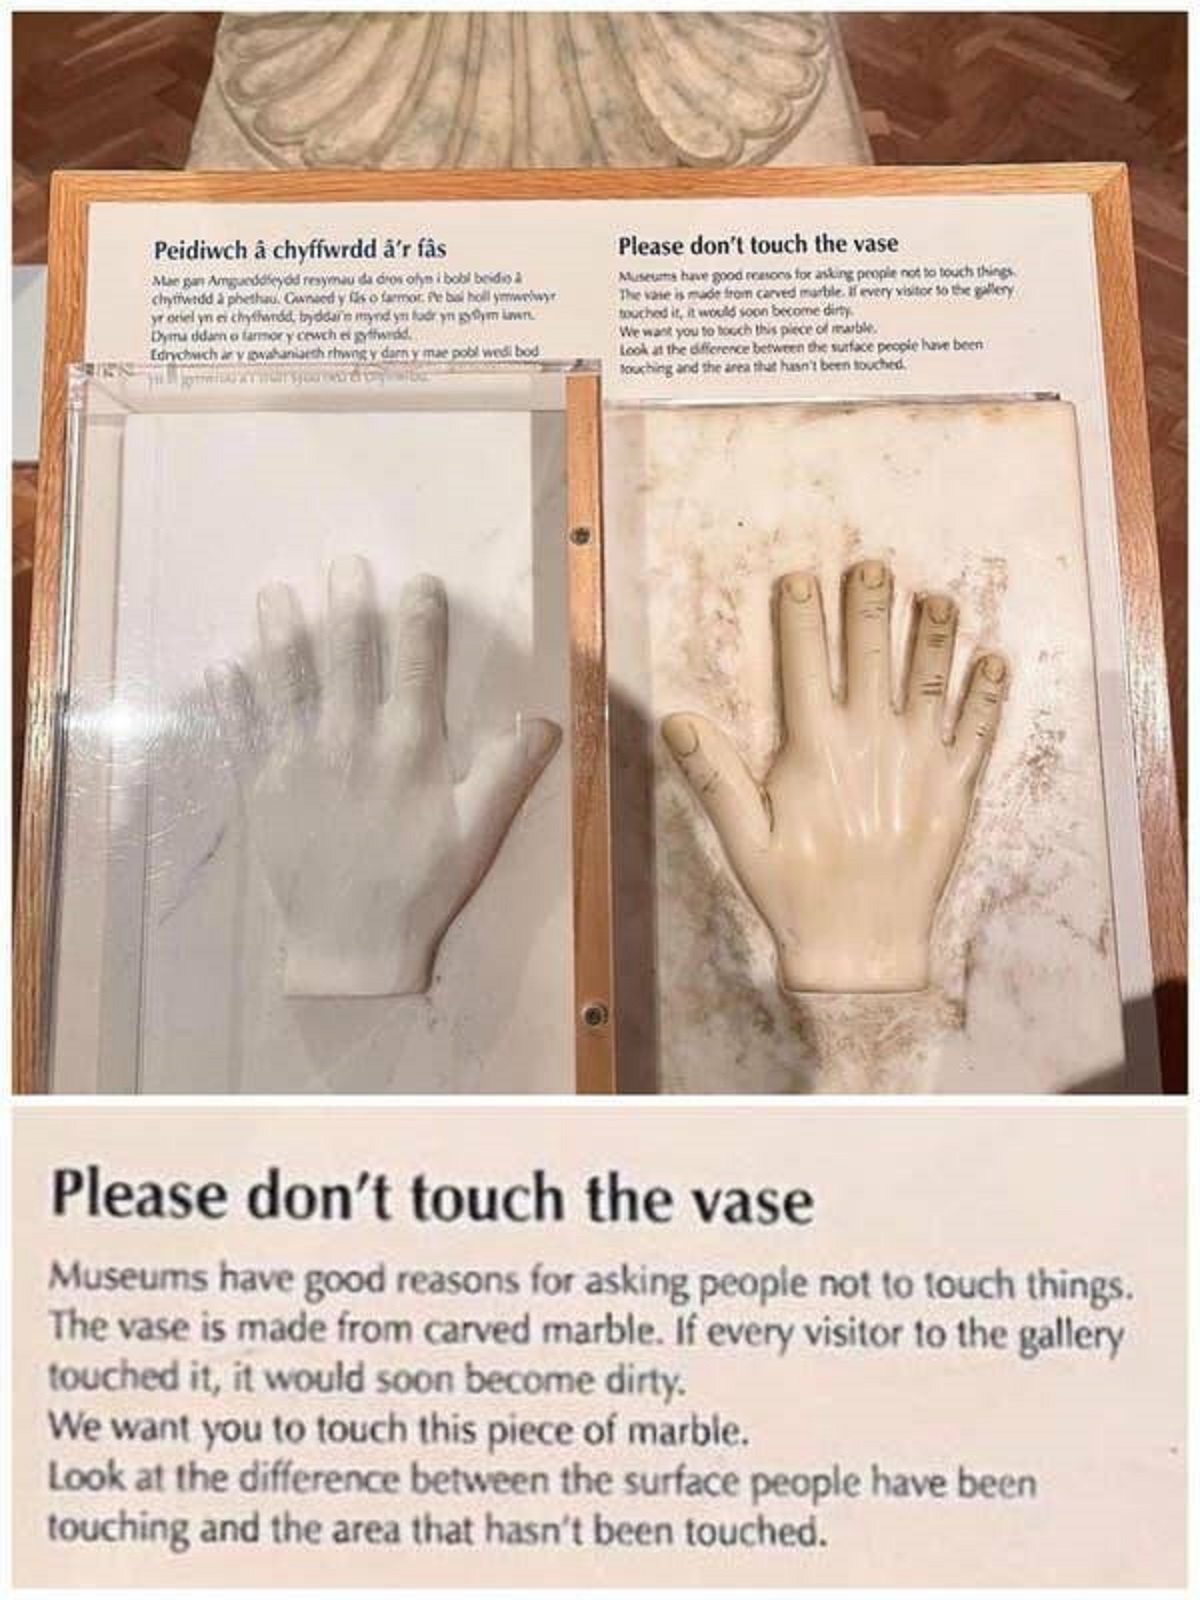 This exhibit shows what happens to marble over time if people are allowed to stick their grubby little paws all over it: